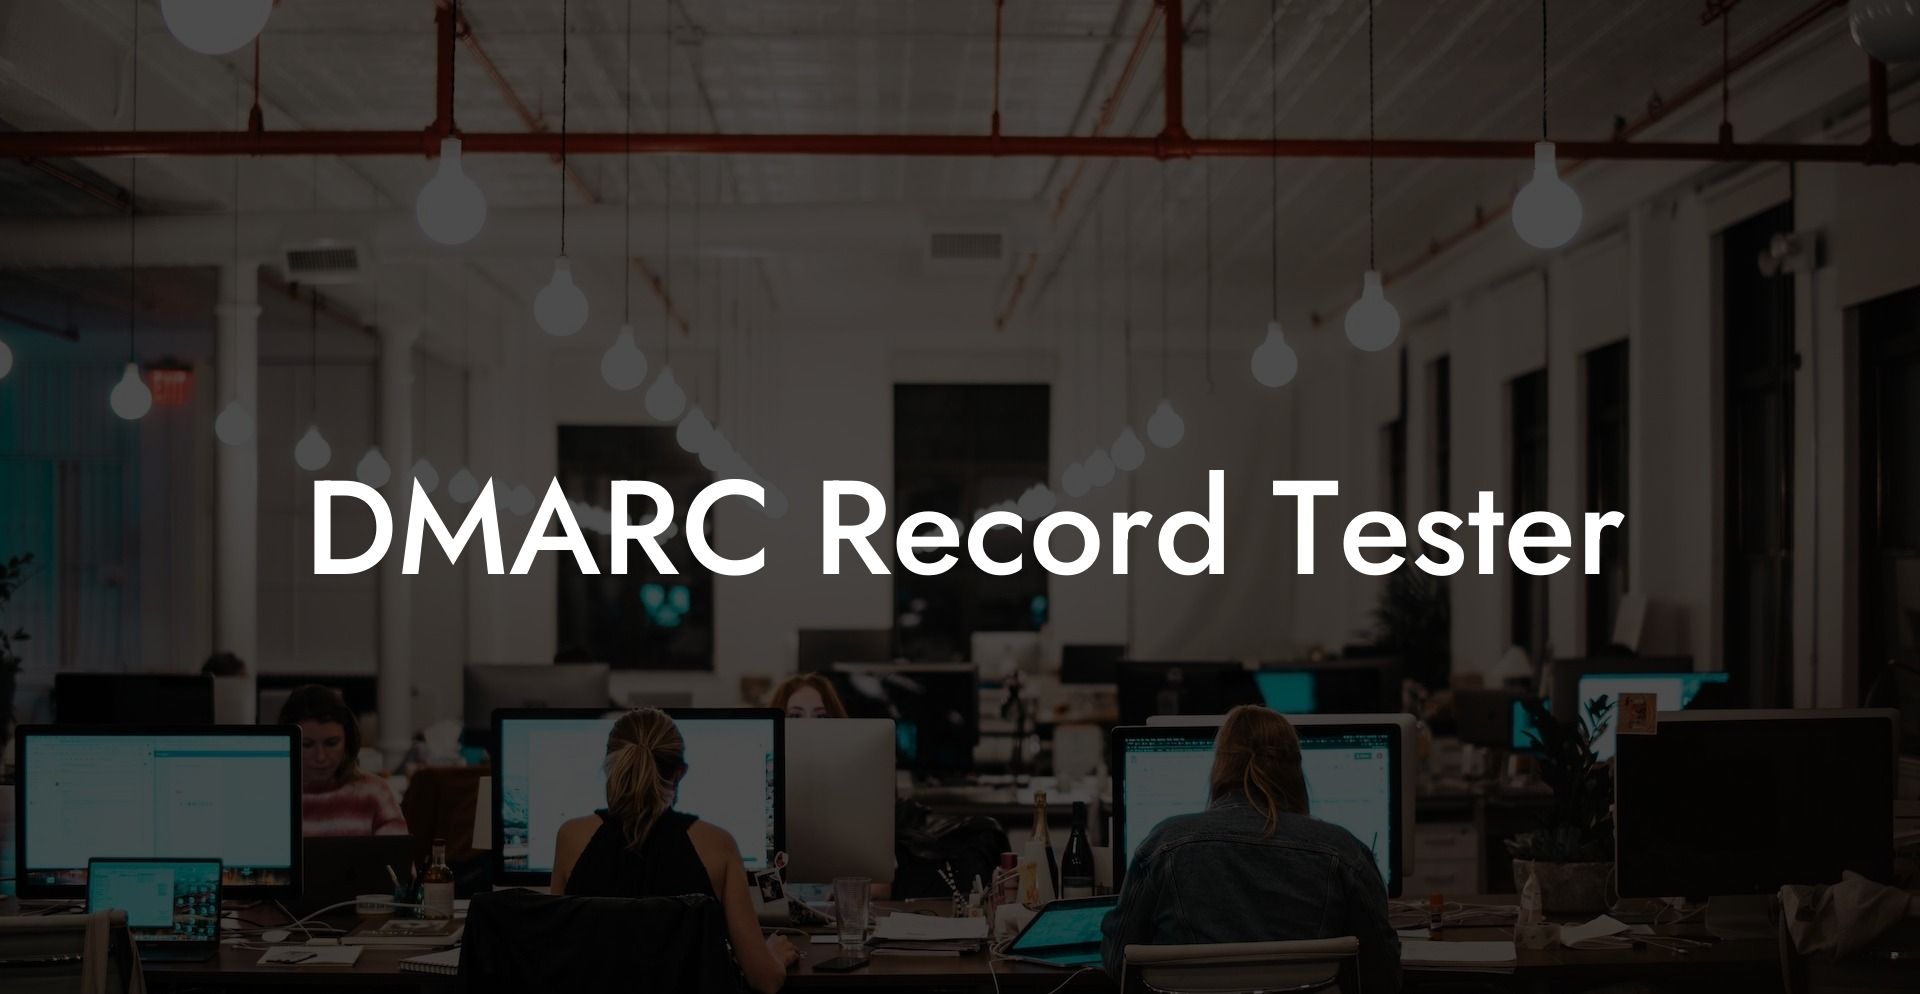 DMARC Record Tester